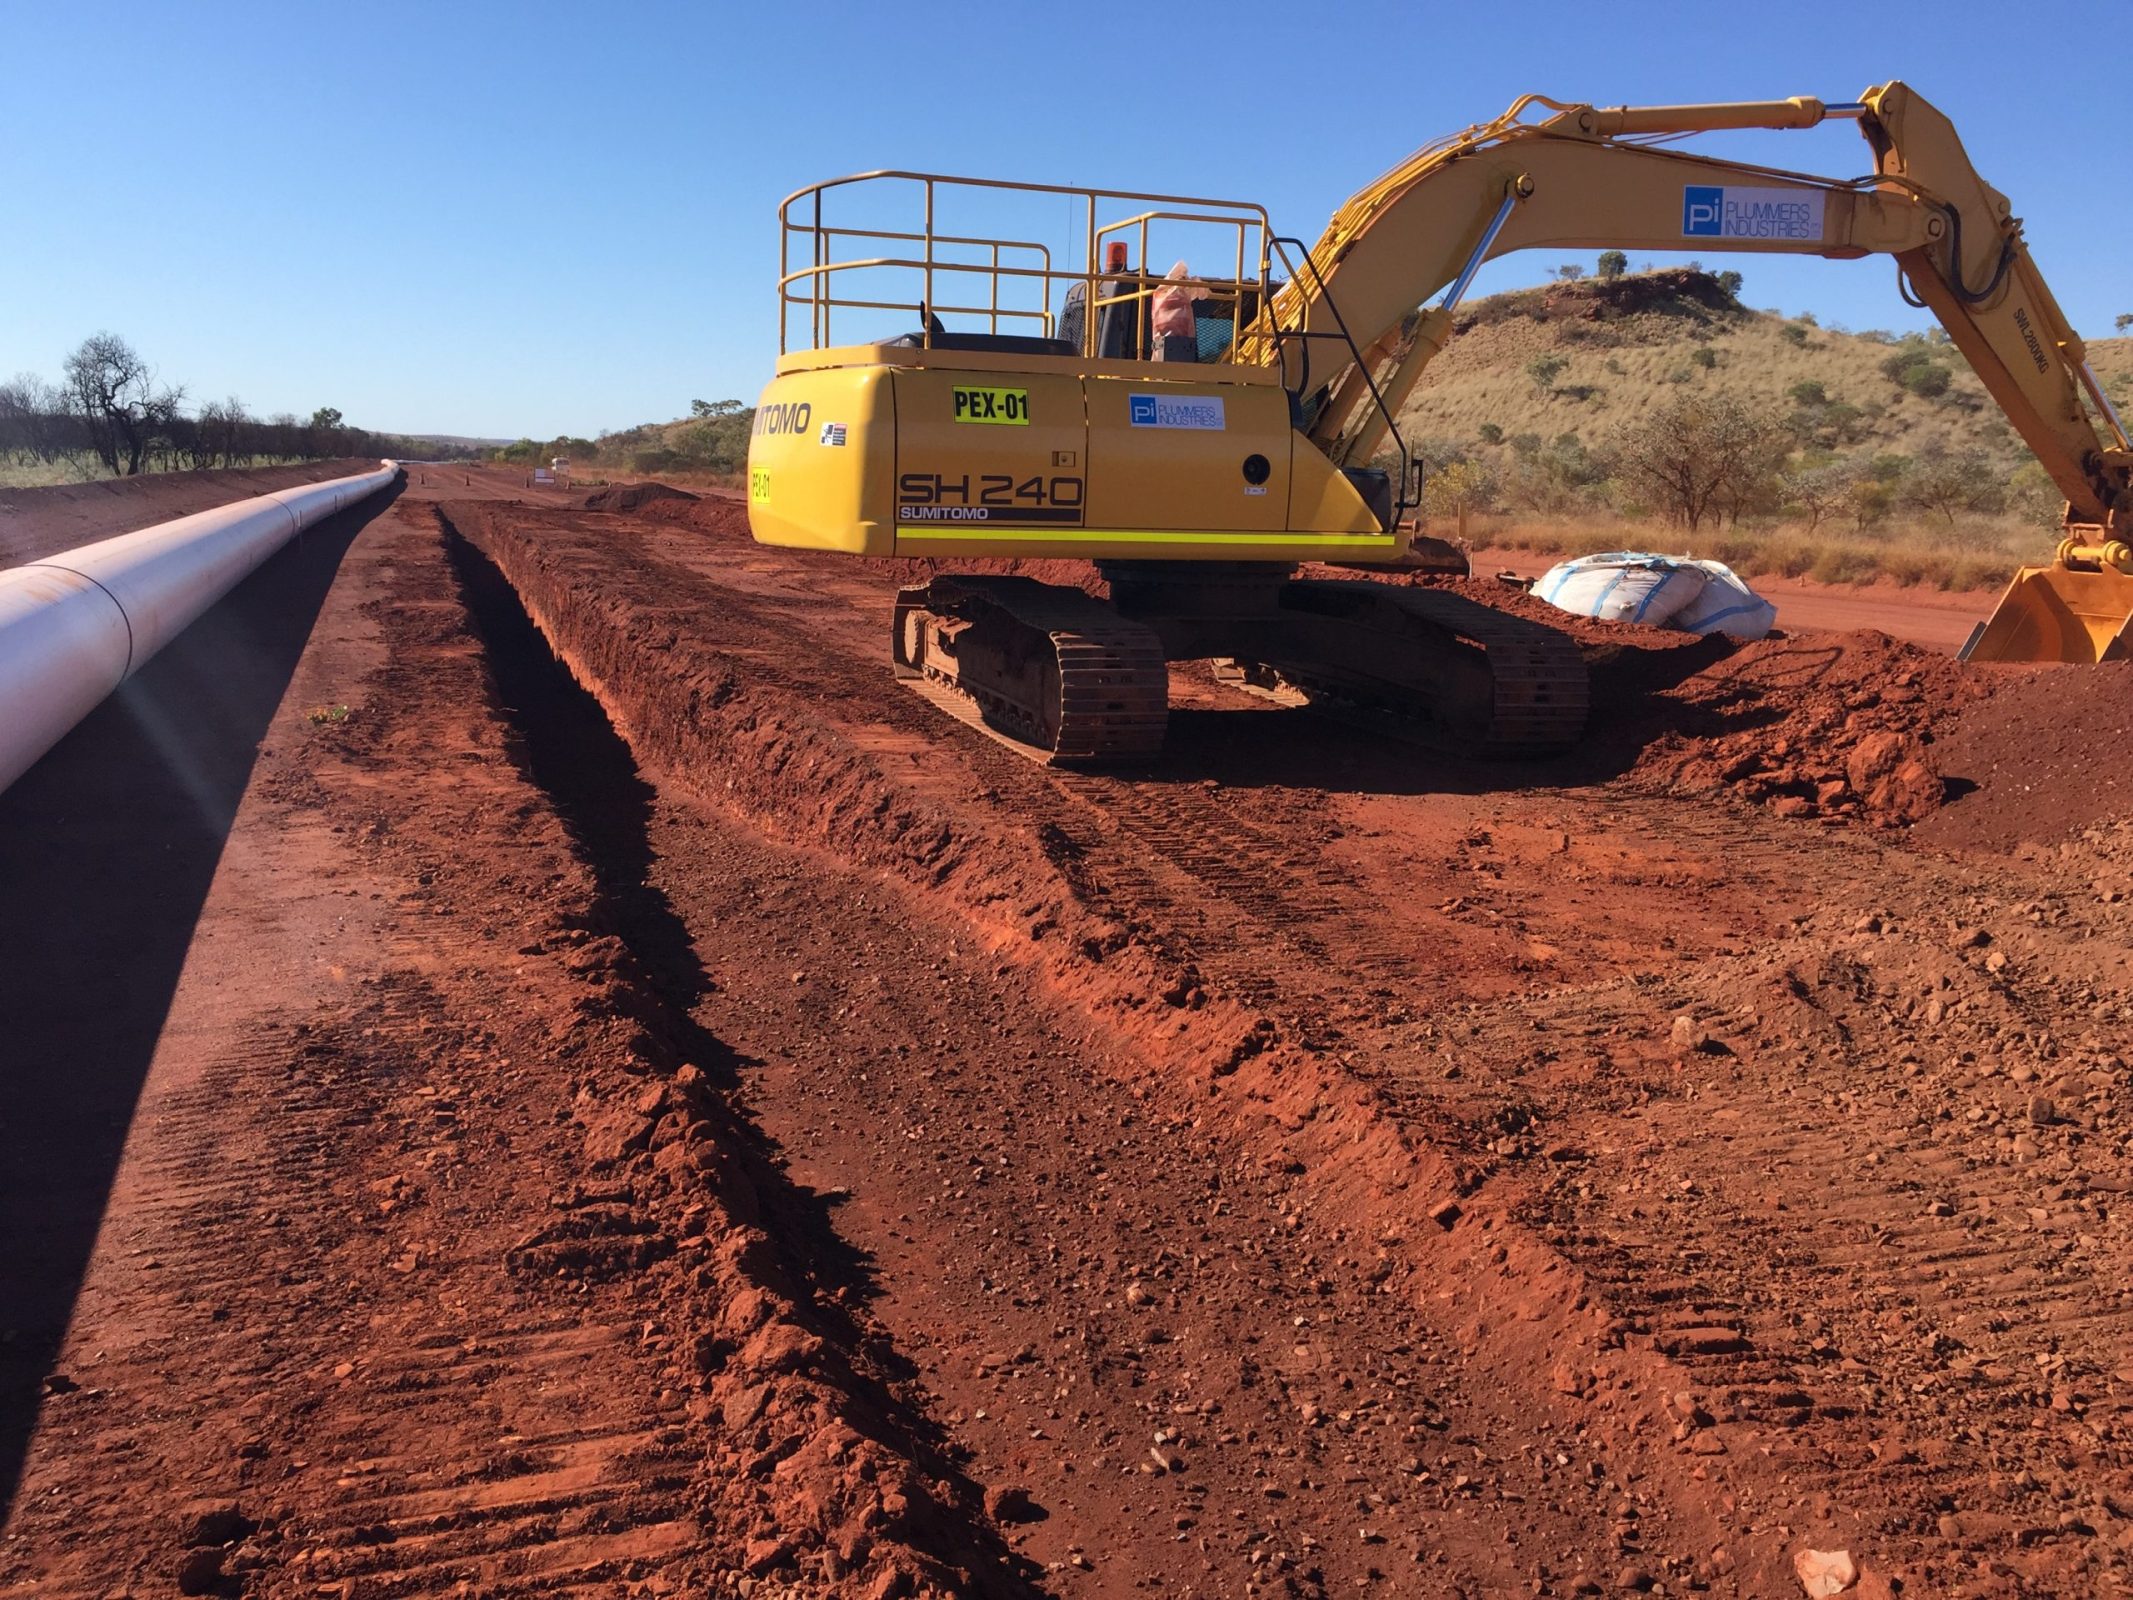 A yellow excavator is busy working on a road as part of an infrastructure pipeline project.